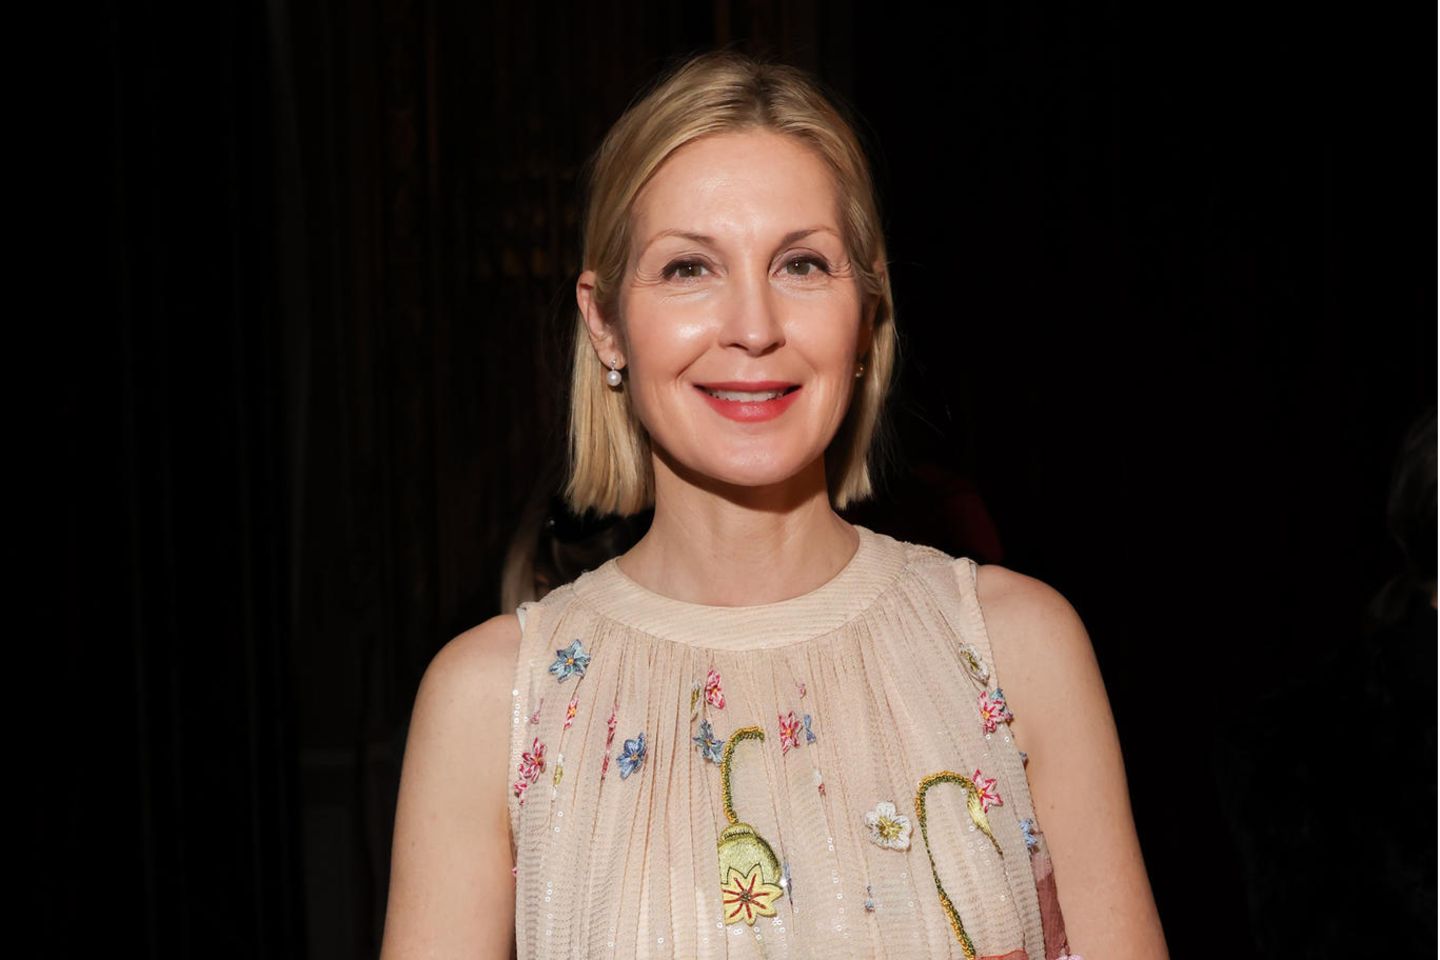 Kelly Rutherford: Kelly Rutherford